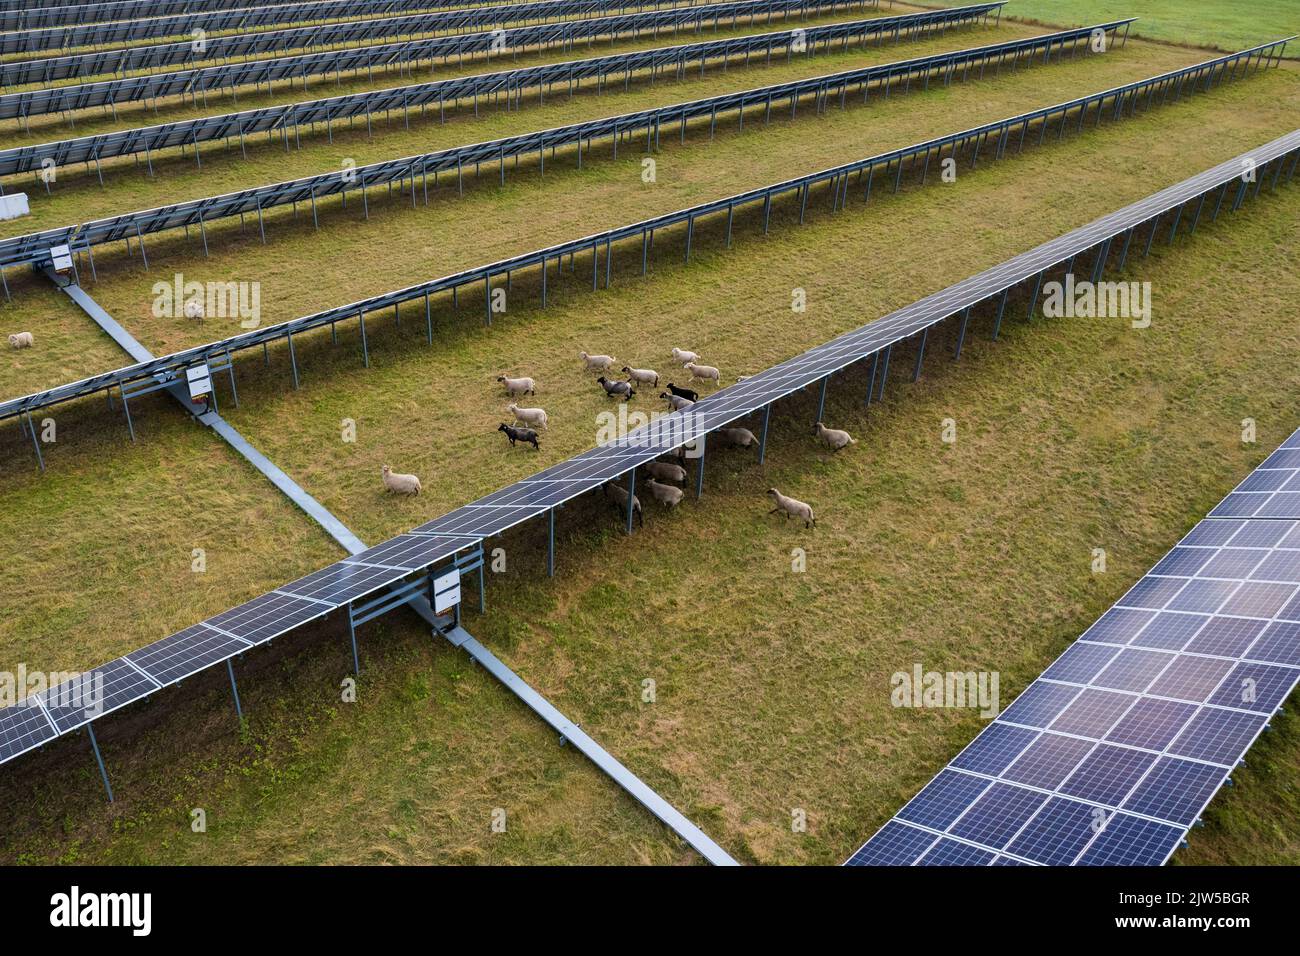 Aerial view of solar panels and sheep eating on a green grass field. Alternative energy source. Stock Photo